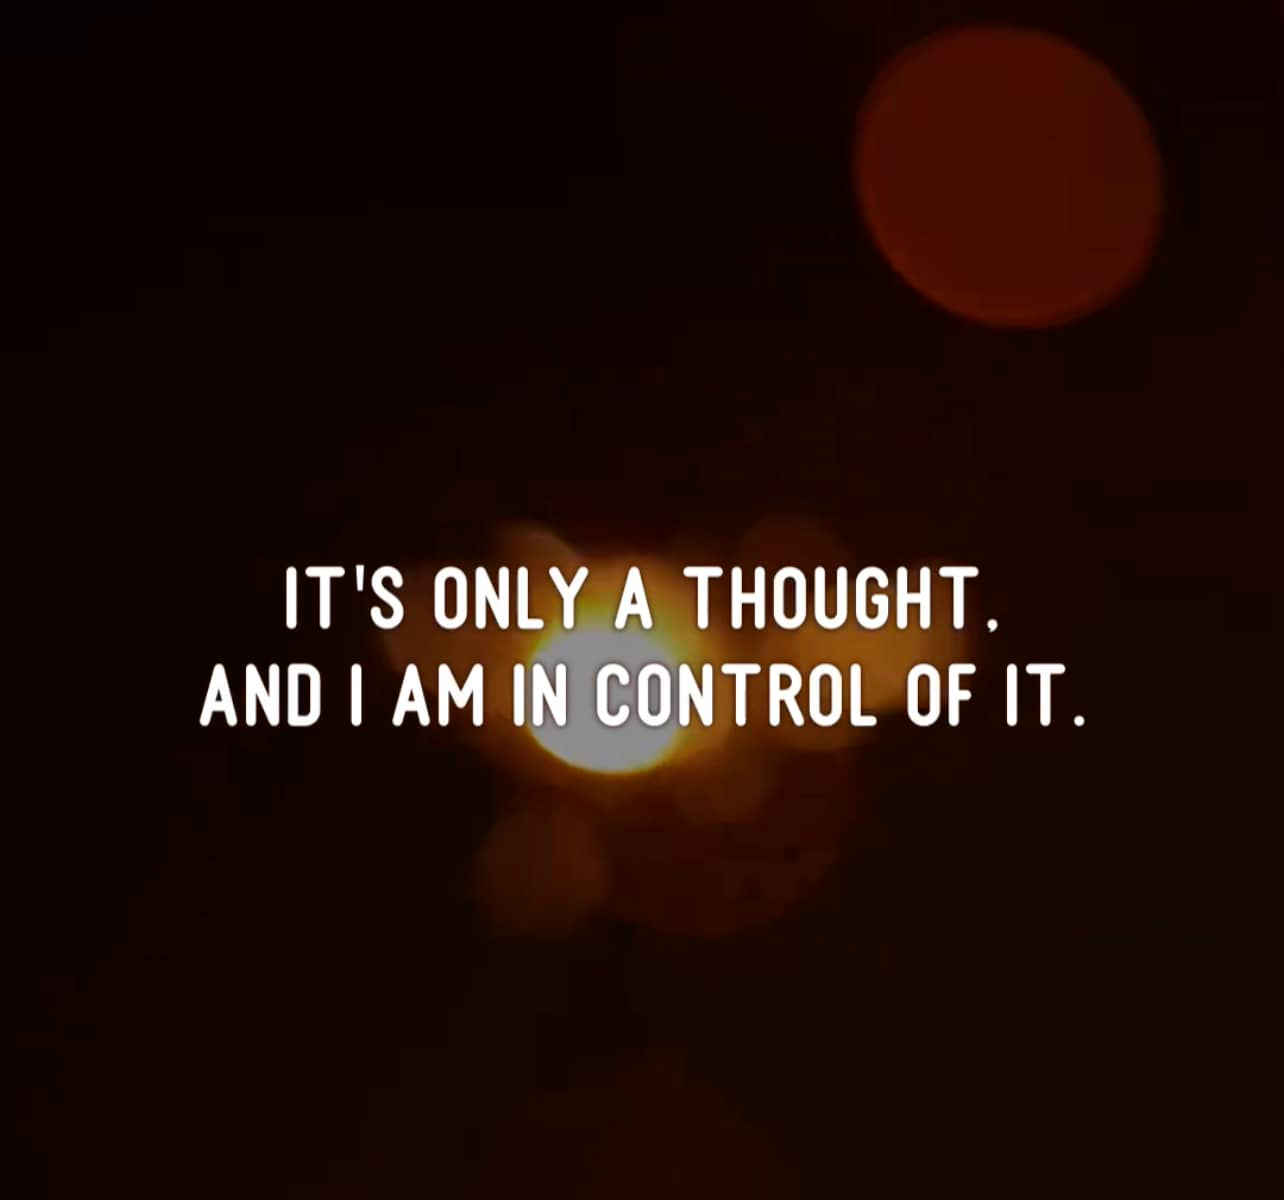 May be an image of text that says 'IT'S ONLY A THOUGHT. AND I AM IN CONTROL OF IT.'